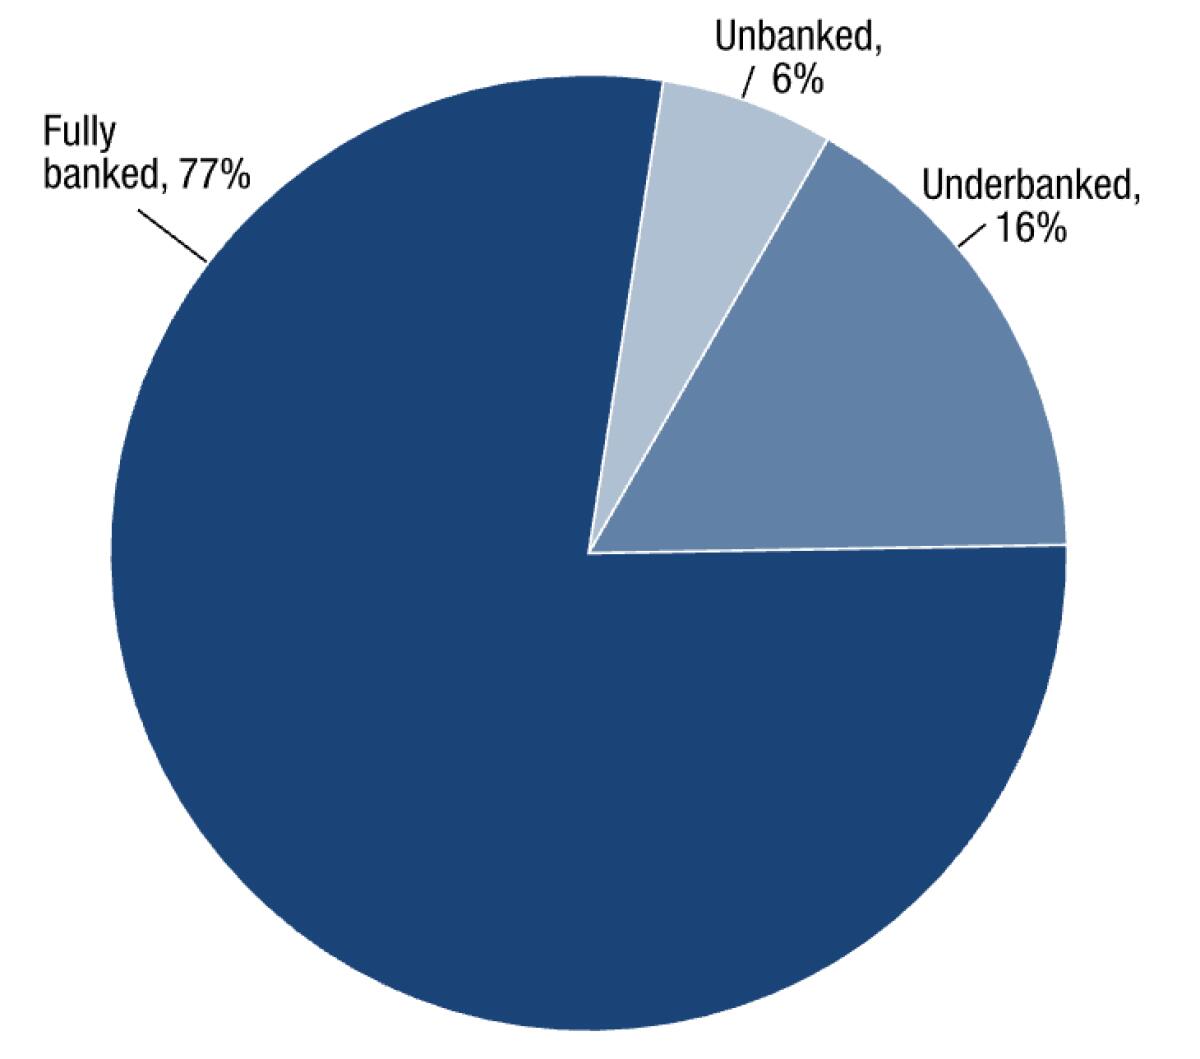 A pie chart showing the banking status of U.S. households